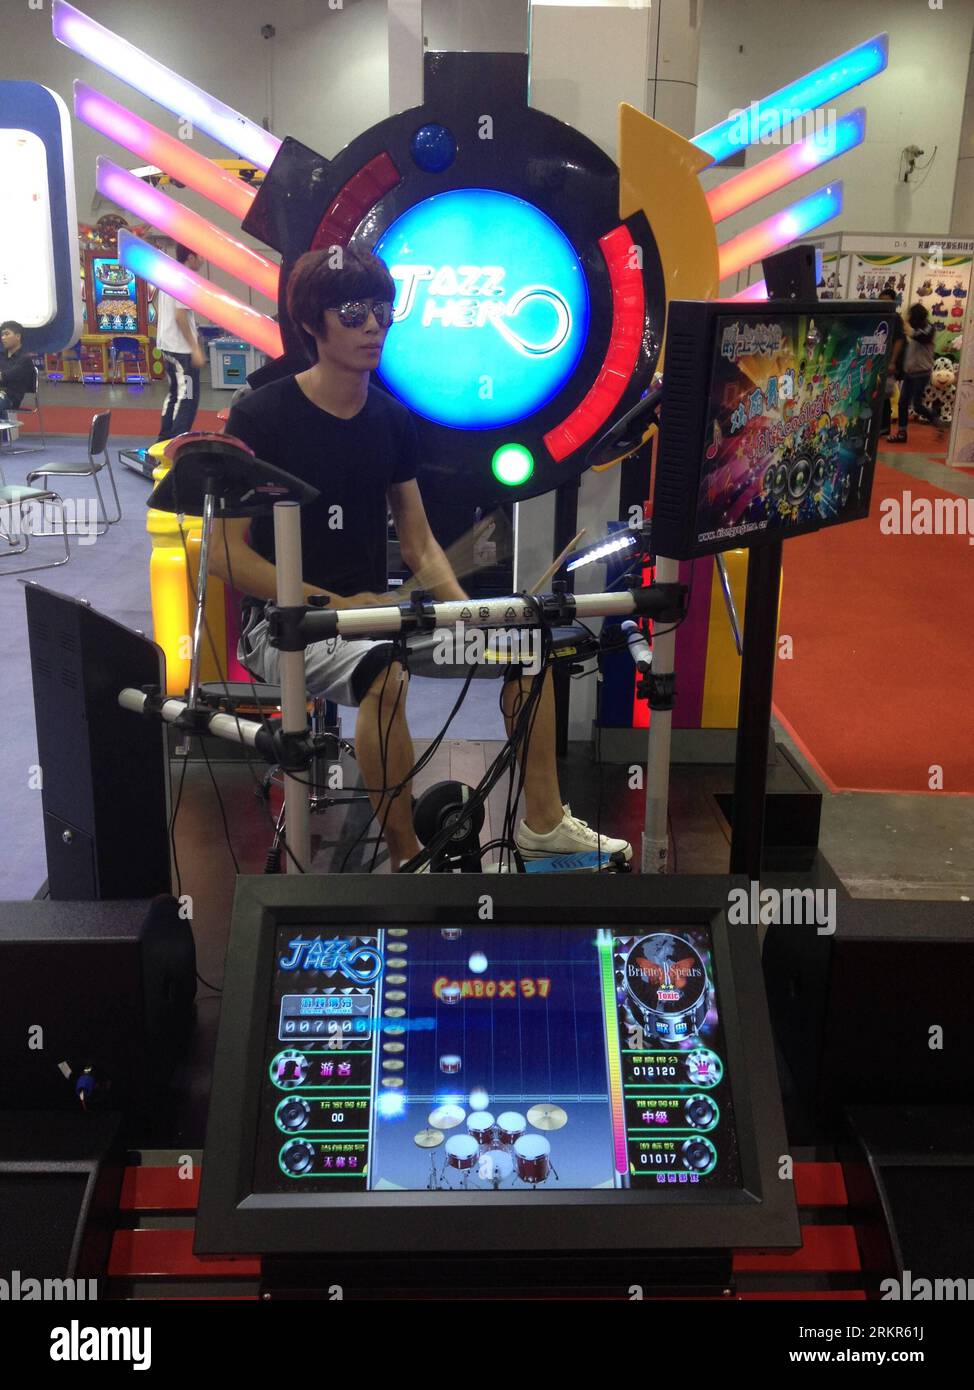 Bildnummer: 58131693  Datum: 21.06.2012  Copyright: imago/Xinhua (120621) -- DALIAN, June 21, 2012 (Xinhua) -- A visitor plays video game at the 2012 China (Dalian) Game show in Dalian, northeast China s Liaoning Province, June 21, 2012. The exposition offers free entrance and will last for three days. (Xinhua/Li Ang) (zmj) CHINA-DALIAN-GAME SHOW (CN) PUBLICATIONxNOTxINxCHN Gesellschaft Messe Videospielmesse Videospiel Computerspiel xbs x0x 2012 hoch      58131693 Date 21 06 2012 Copyright Imago XINHUA  Dalian June 21 2012 XINHUA a Visitor PLAYS Video Game AT The 2012 China Dalian Game Show in Stock Photo